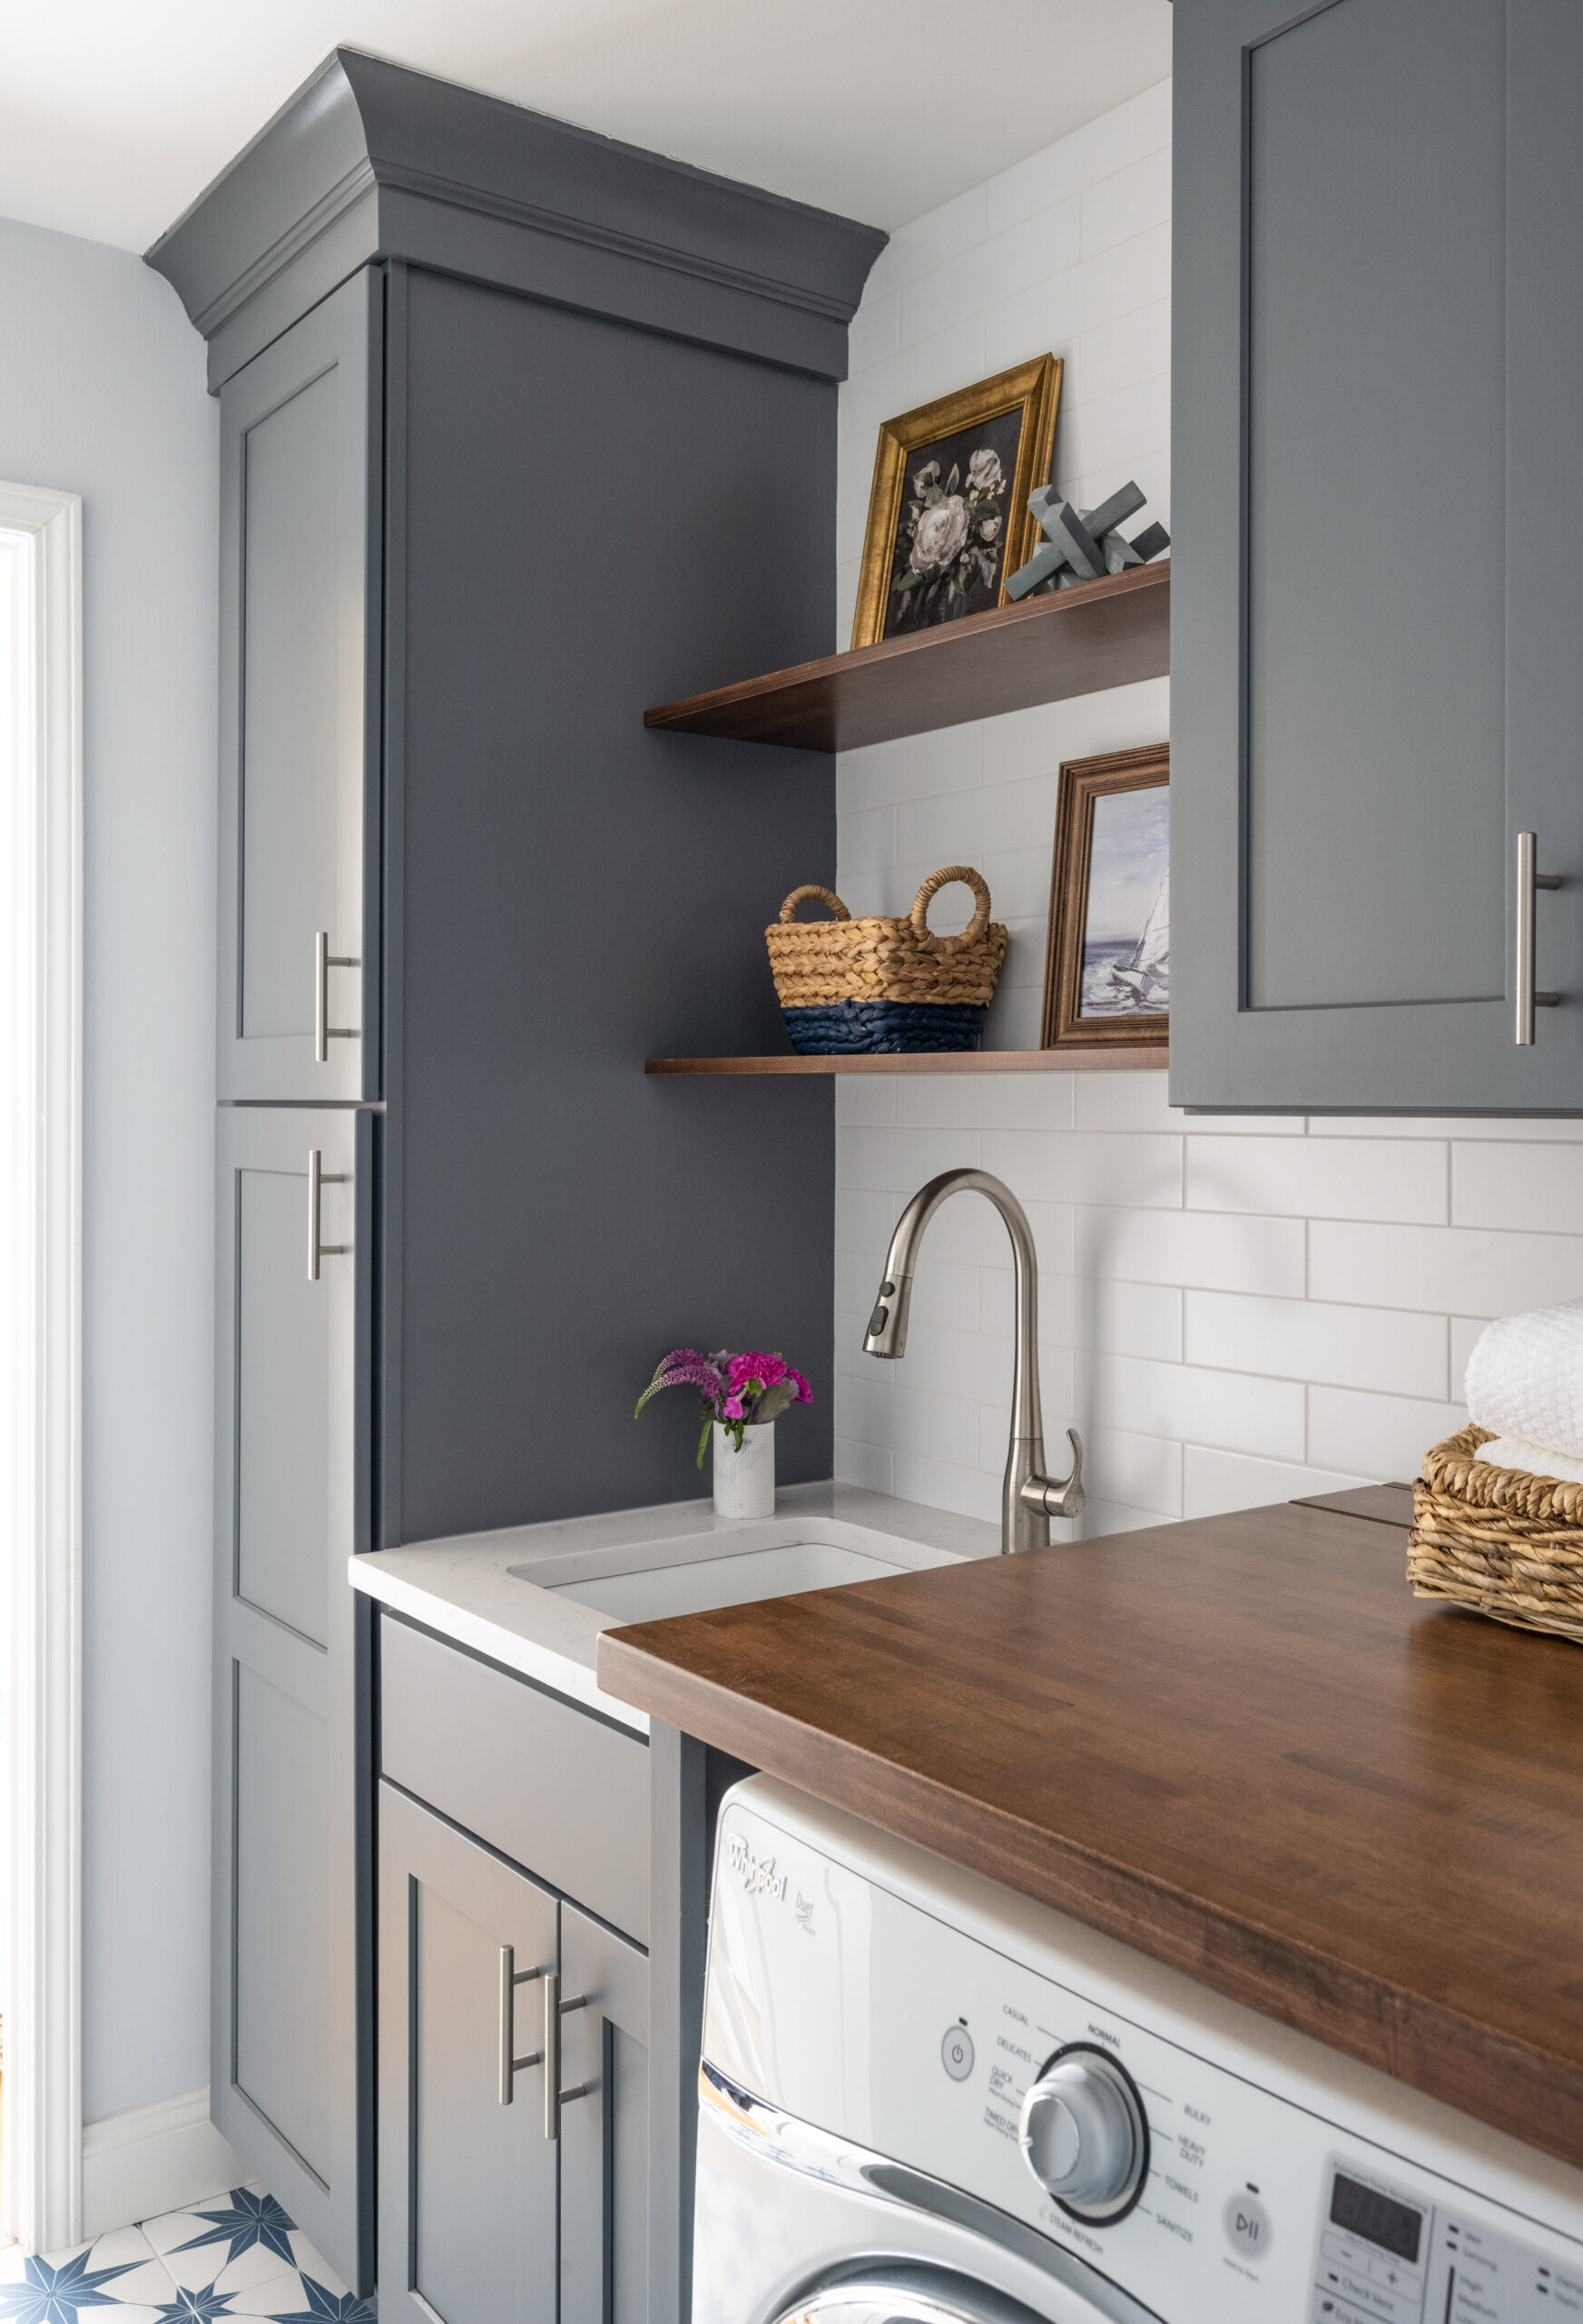 Needham laundry room with deep bluish gray cabinets, laundry room sink and walnut countertop. Design by JP Hoffman Design Build